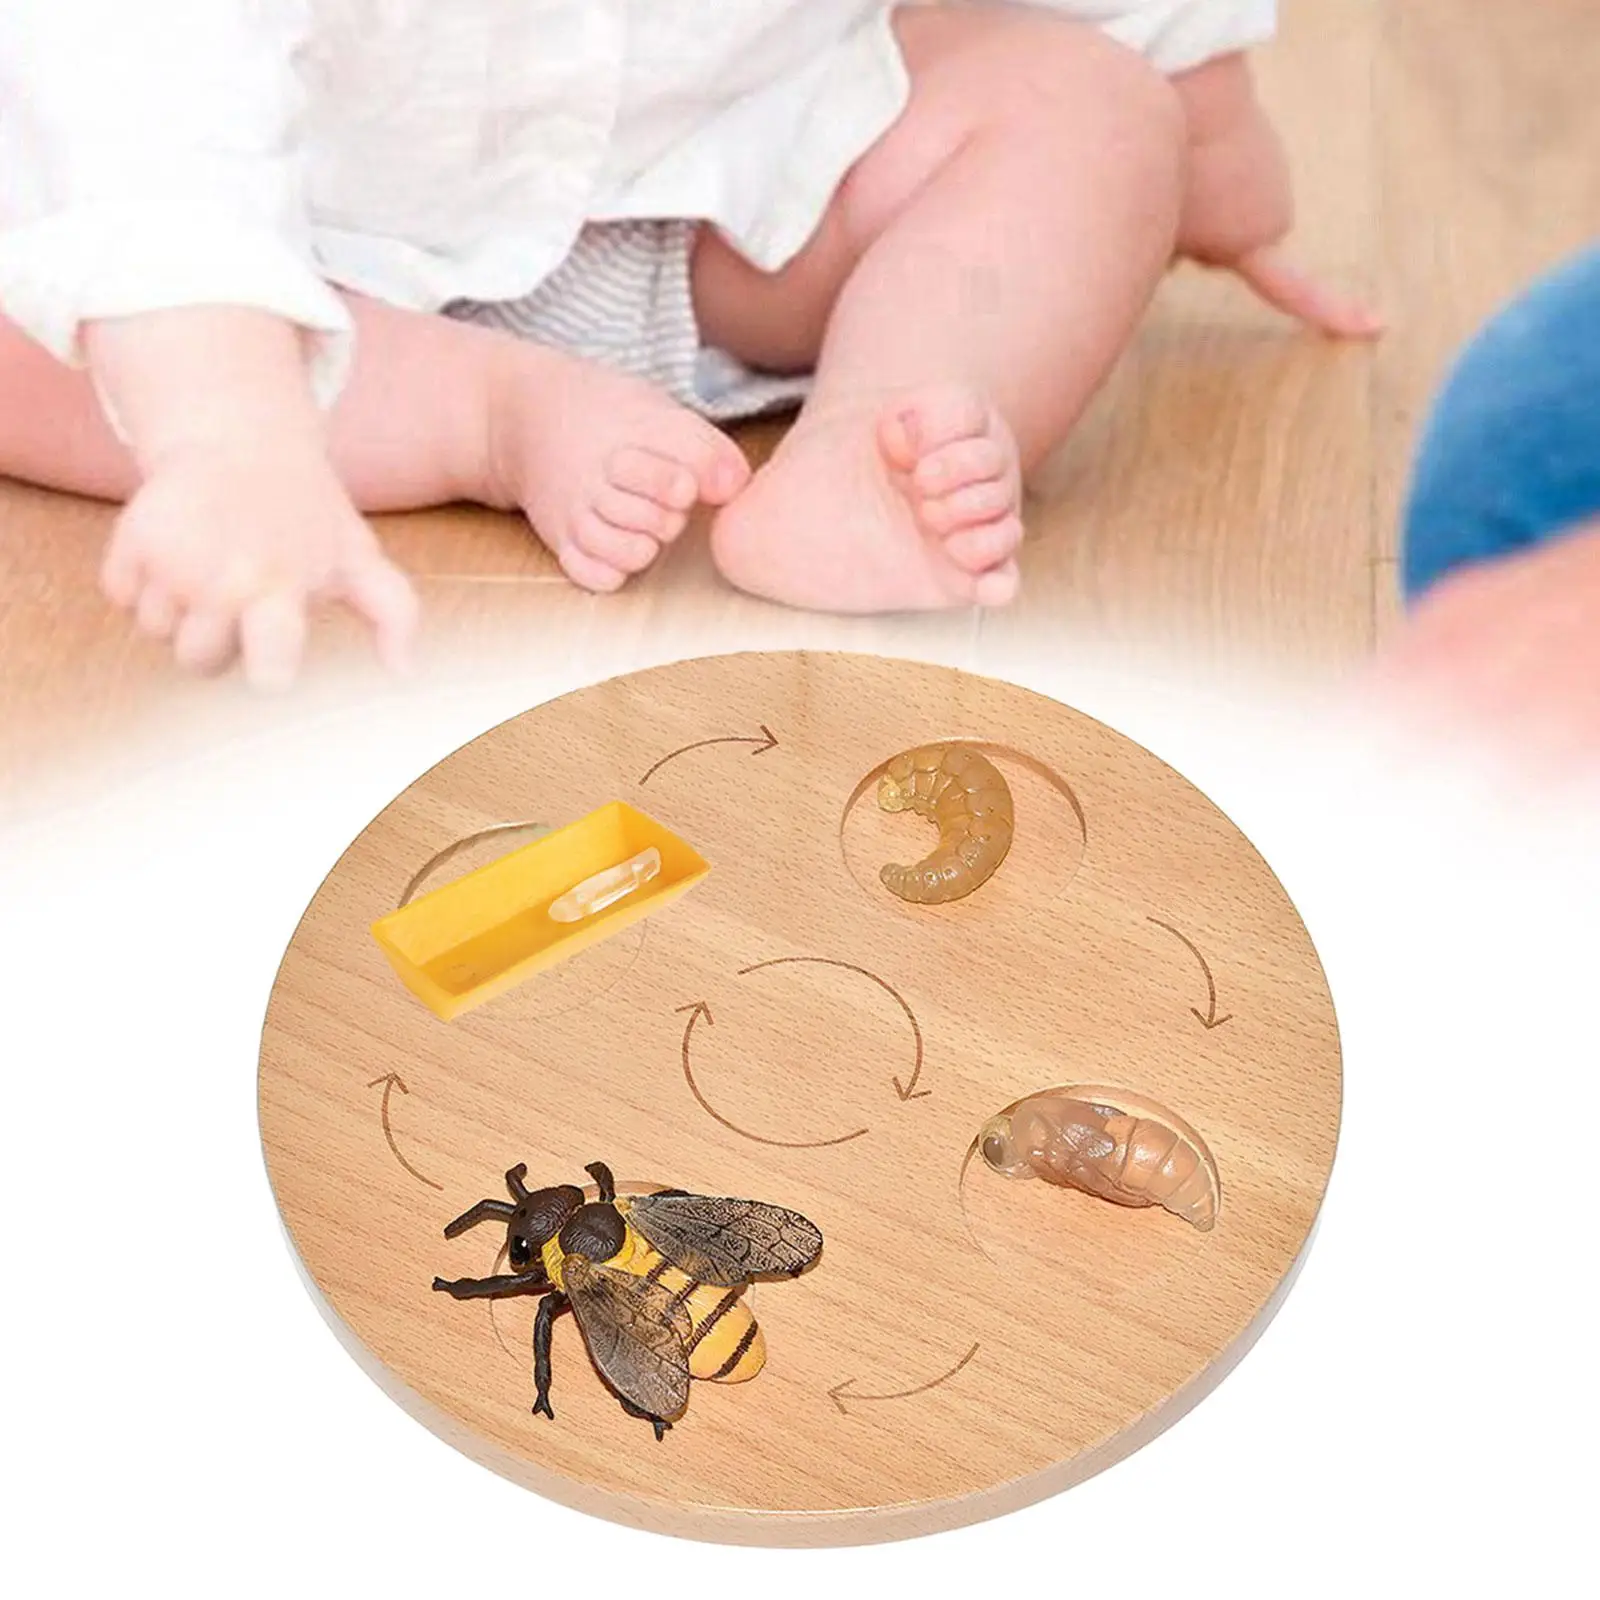 Life Cycle Tray Montessori Toys Educational Realistic Birthday Gifts Teaching Aids for Boys Girls Sensory Toy Cognitive Toy